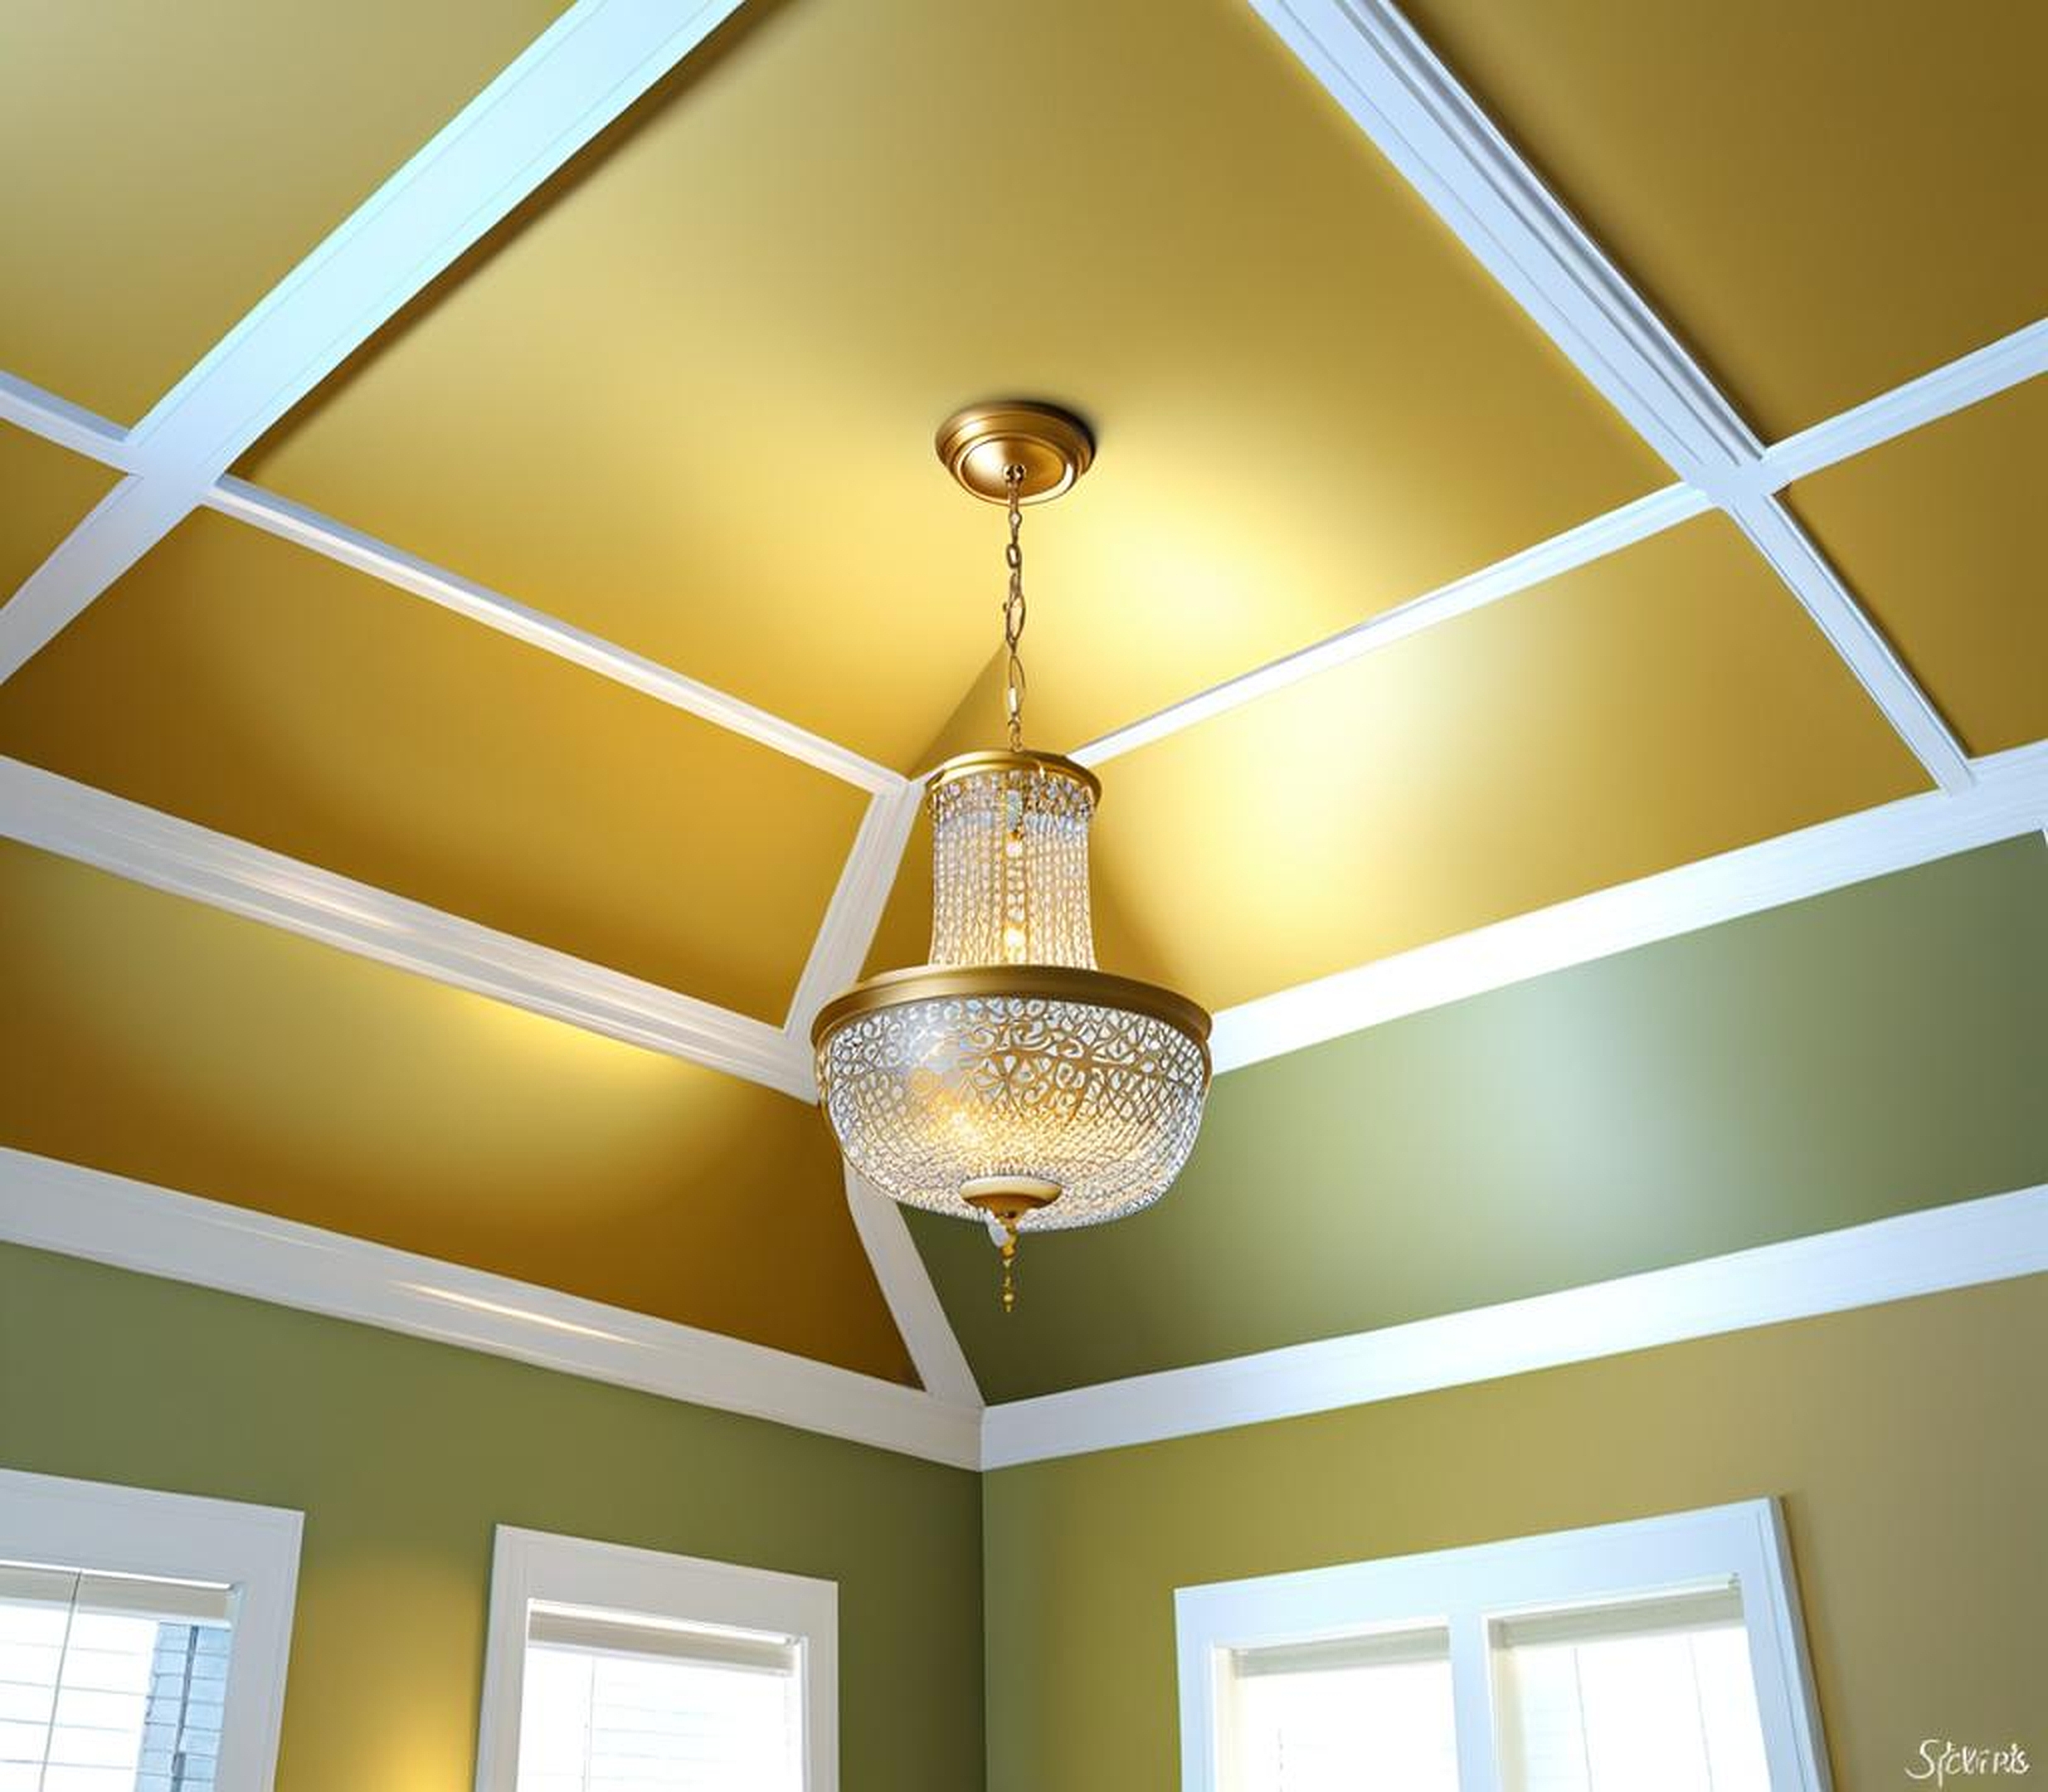 A Step-by-Step Guide on How to Paint a Tray Ceiling with Ease